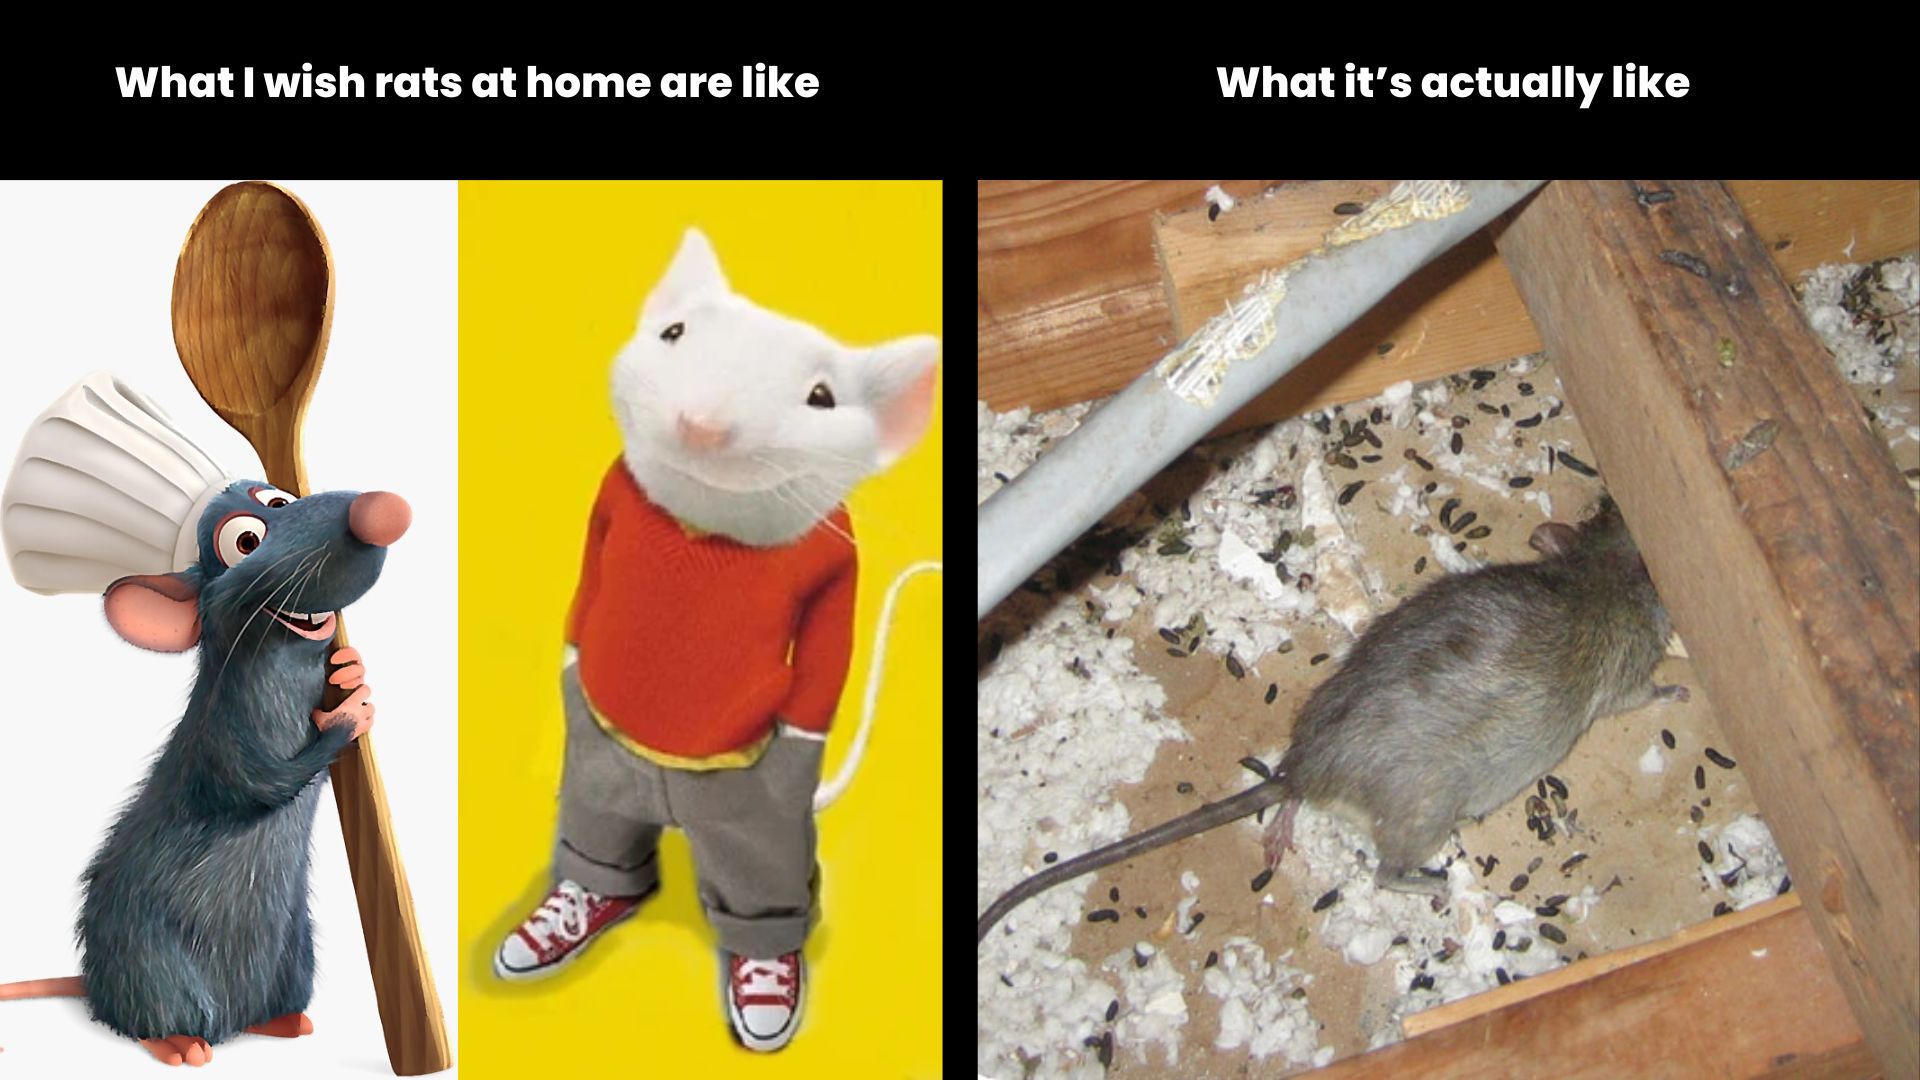 A meme comparing what you think of rats at home (Stuart Little and Remy from Ratatou) with the reality (a rat in an attic surrounded by droppings)